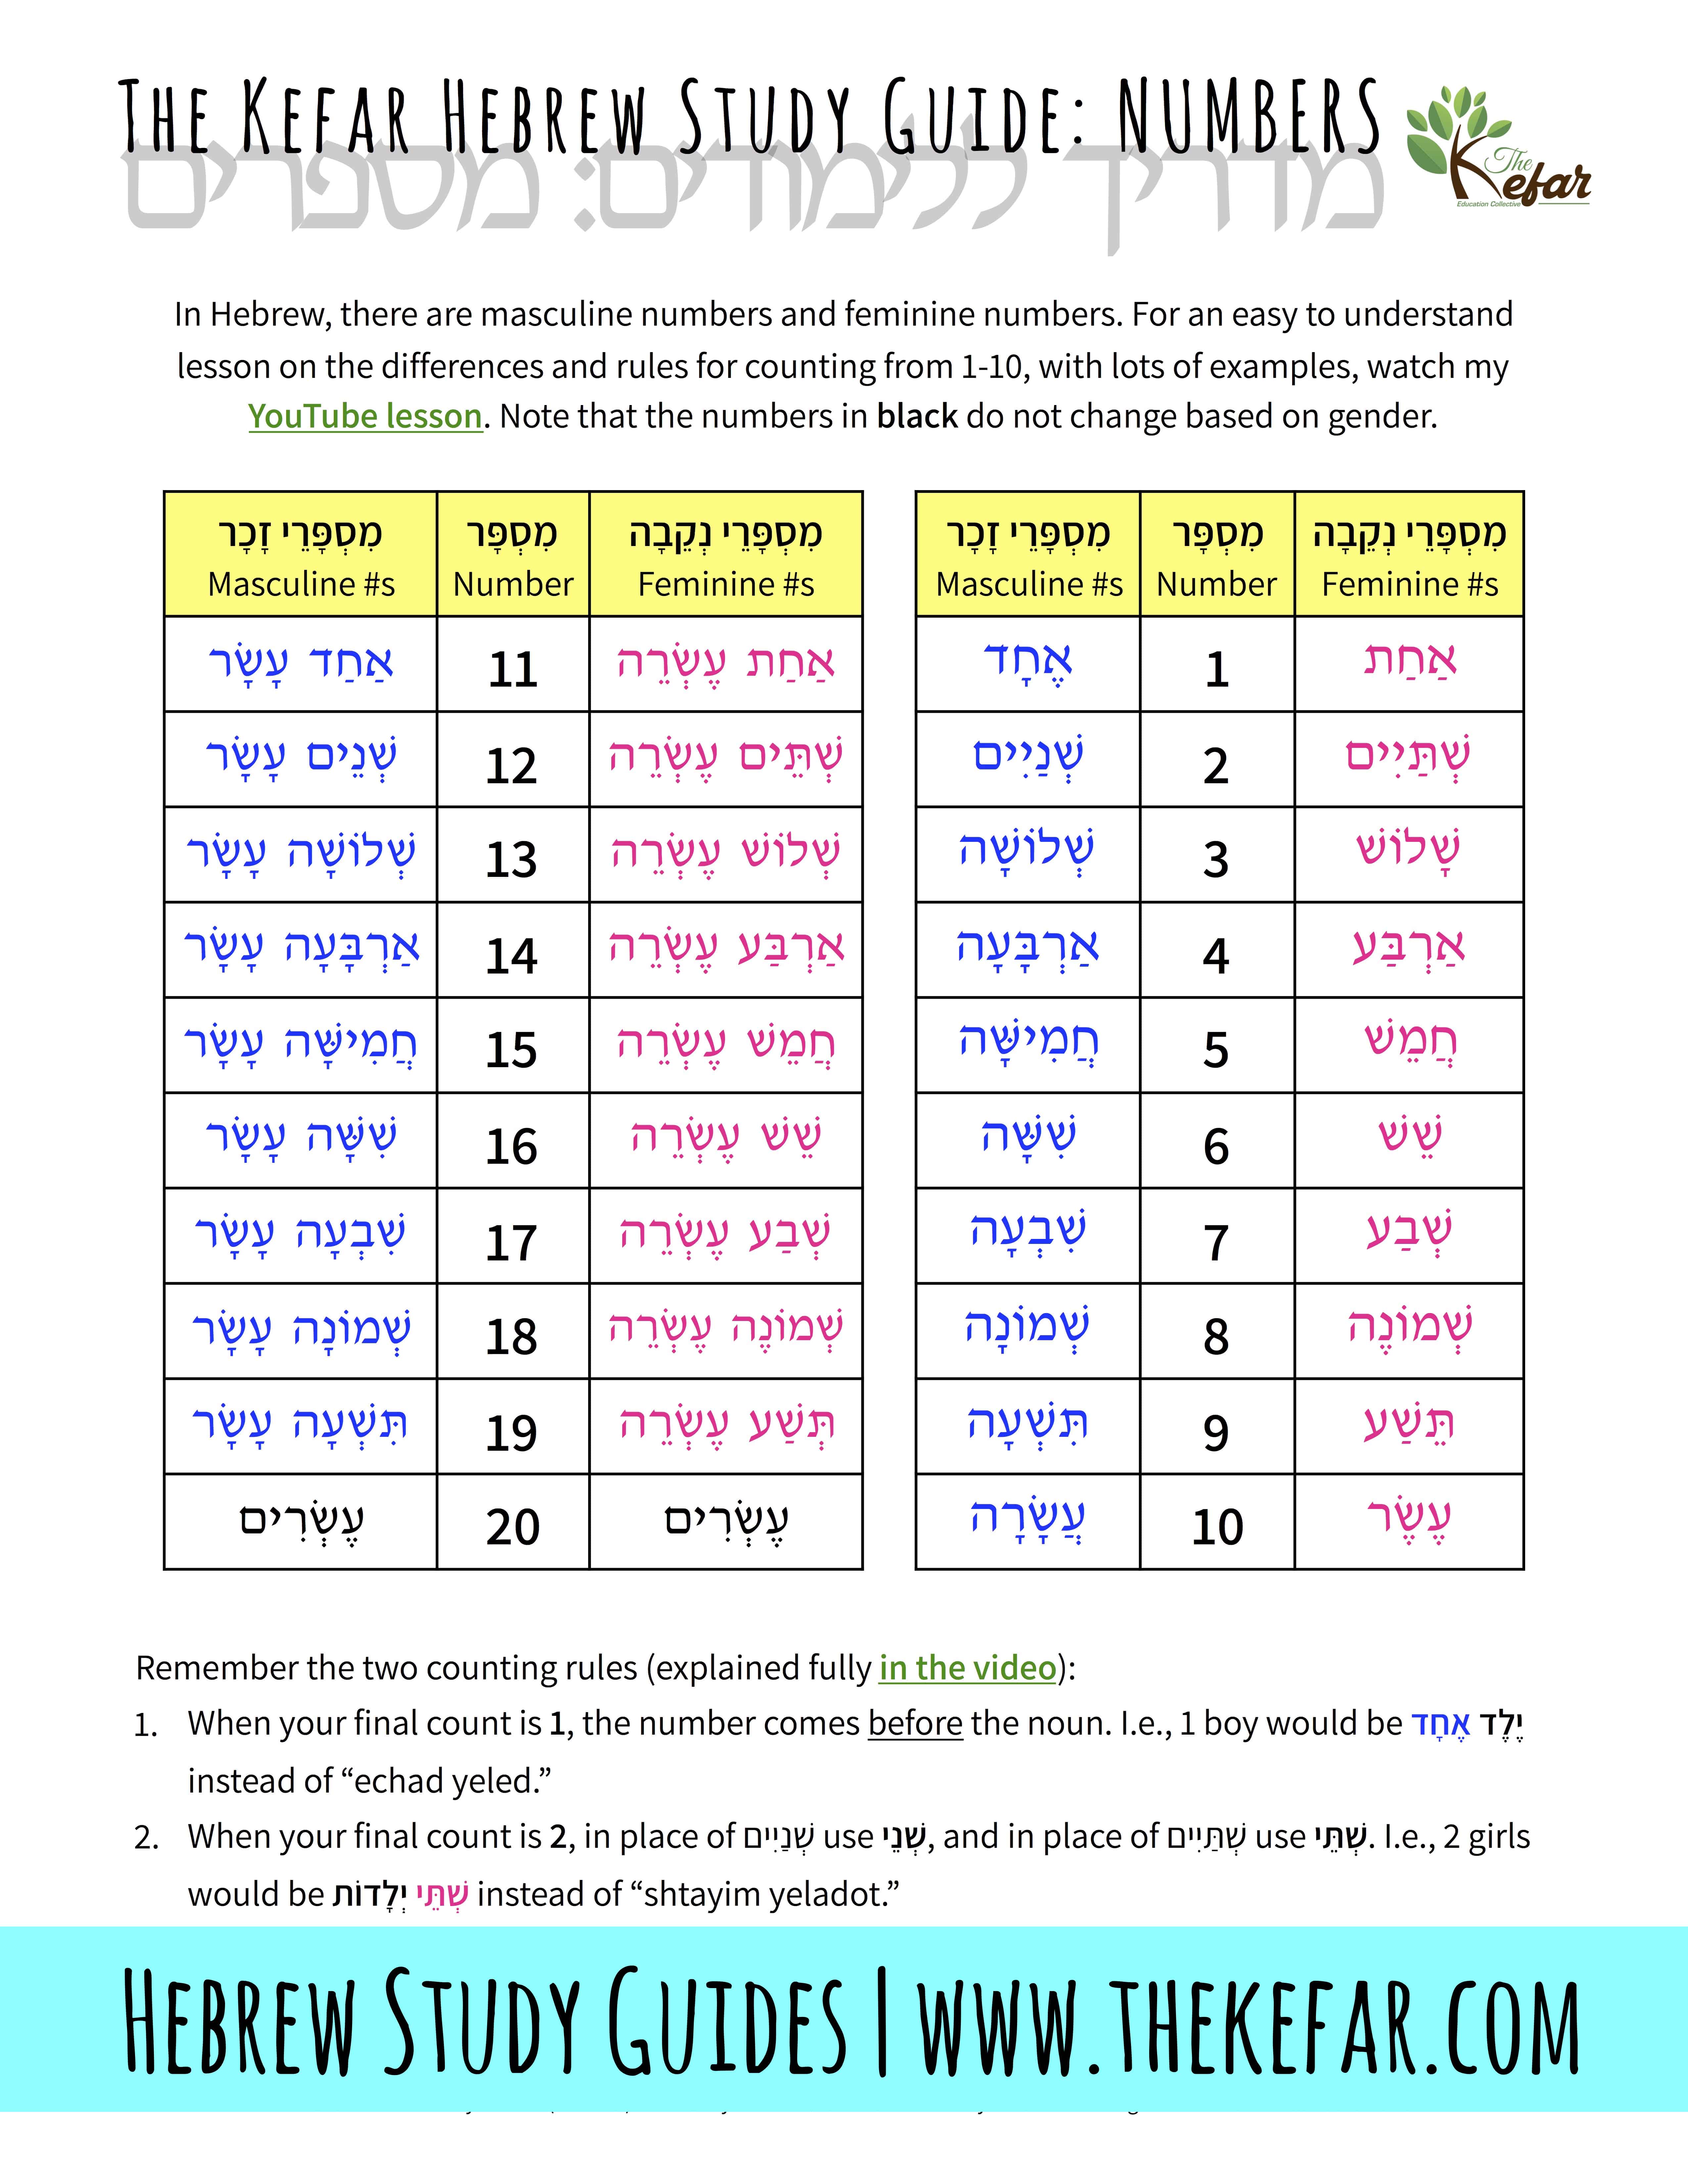 Picture of The Kefar Hebrew Study Guide for numbers. There are tables showing numbers 1-20 written in Hebrew, and explanatory text above and below the tables. Created by T'helah Ben-Dan for The Kefar